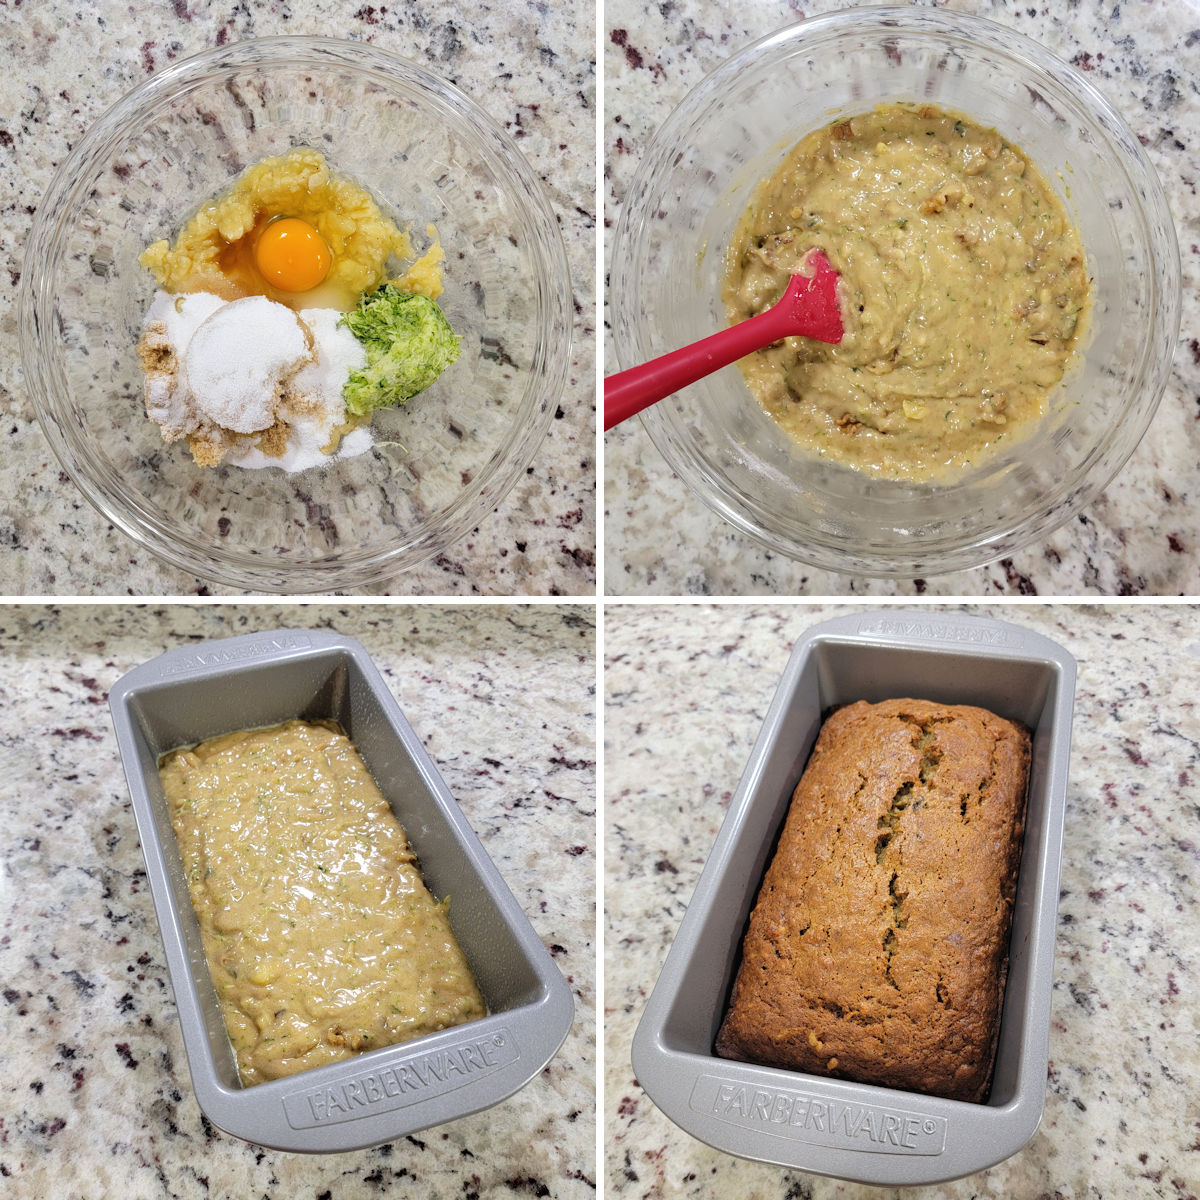 Mixing banana zucchini bread batter, pouring into a loaf pan, and baking.